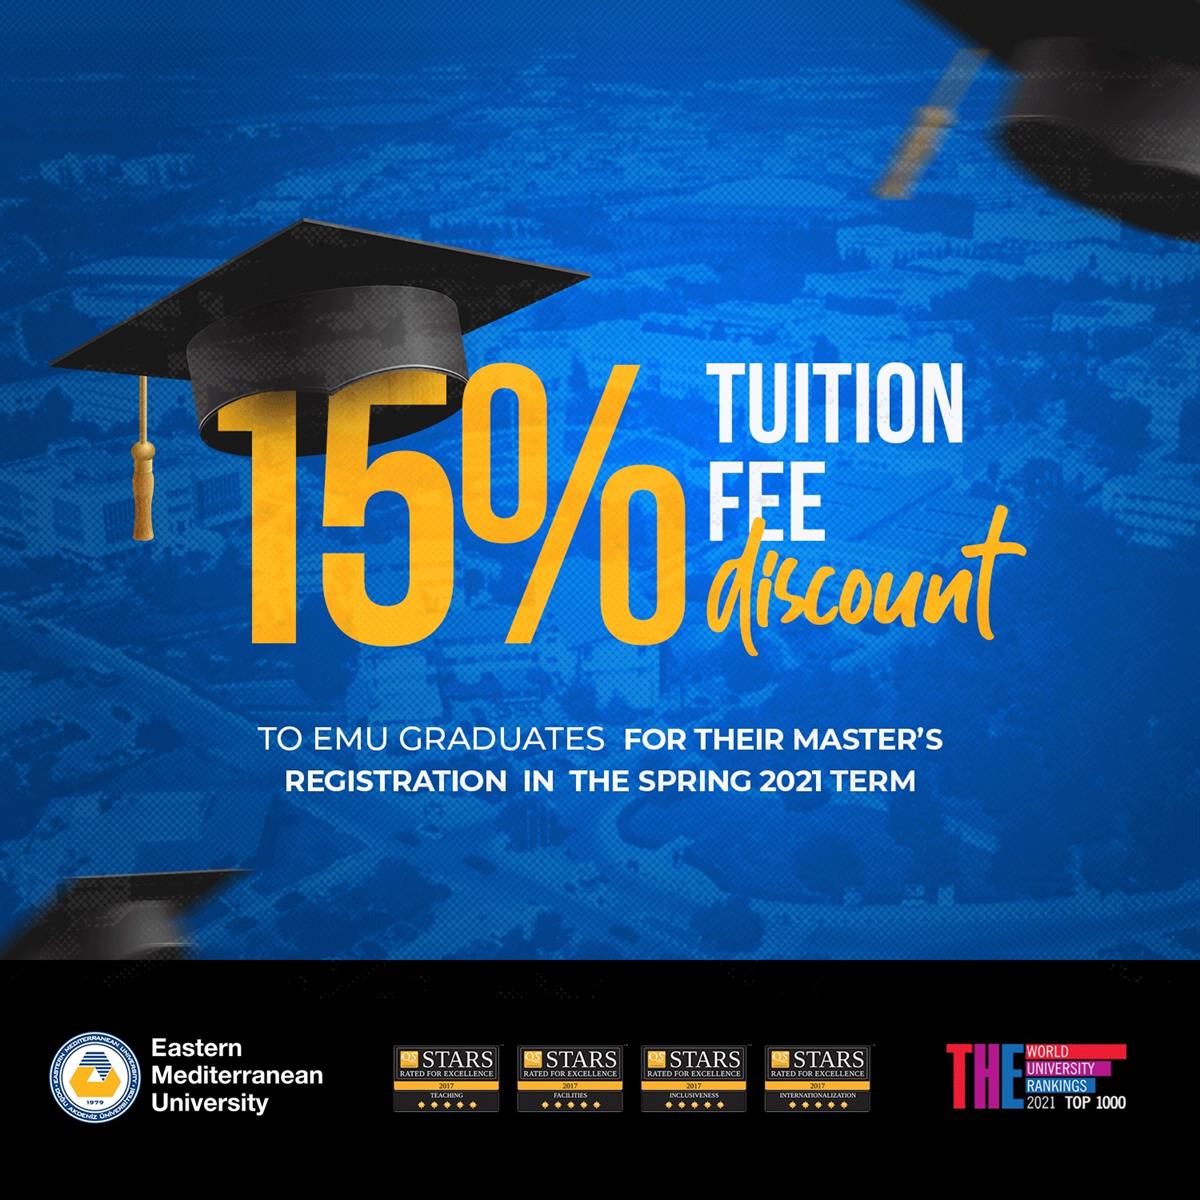 Extra Tuition Fee Discount